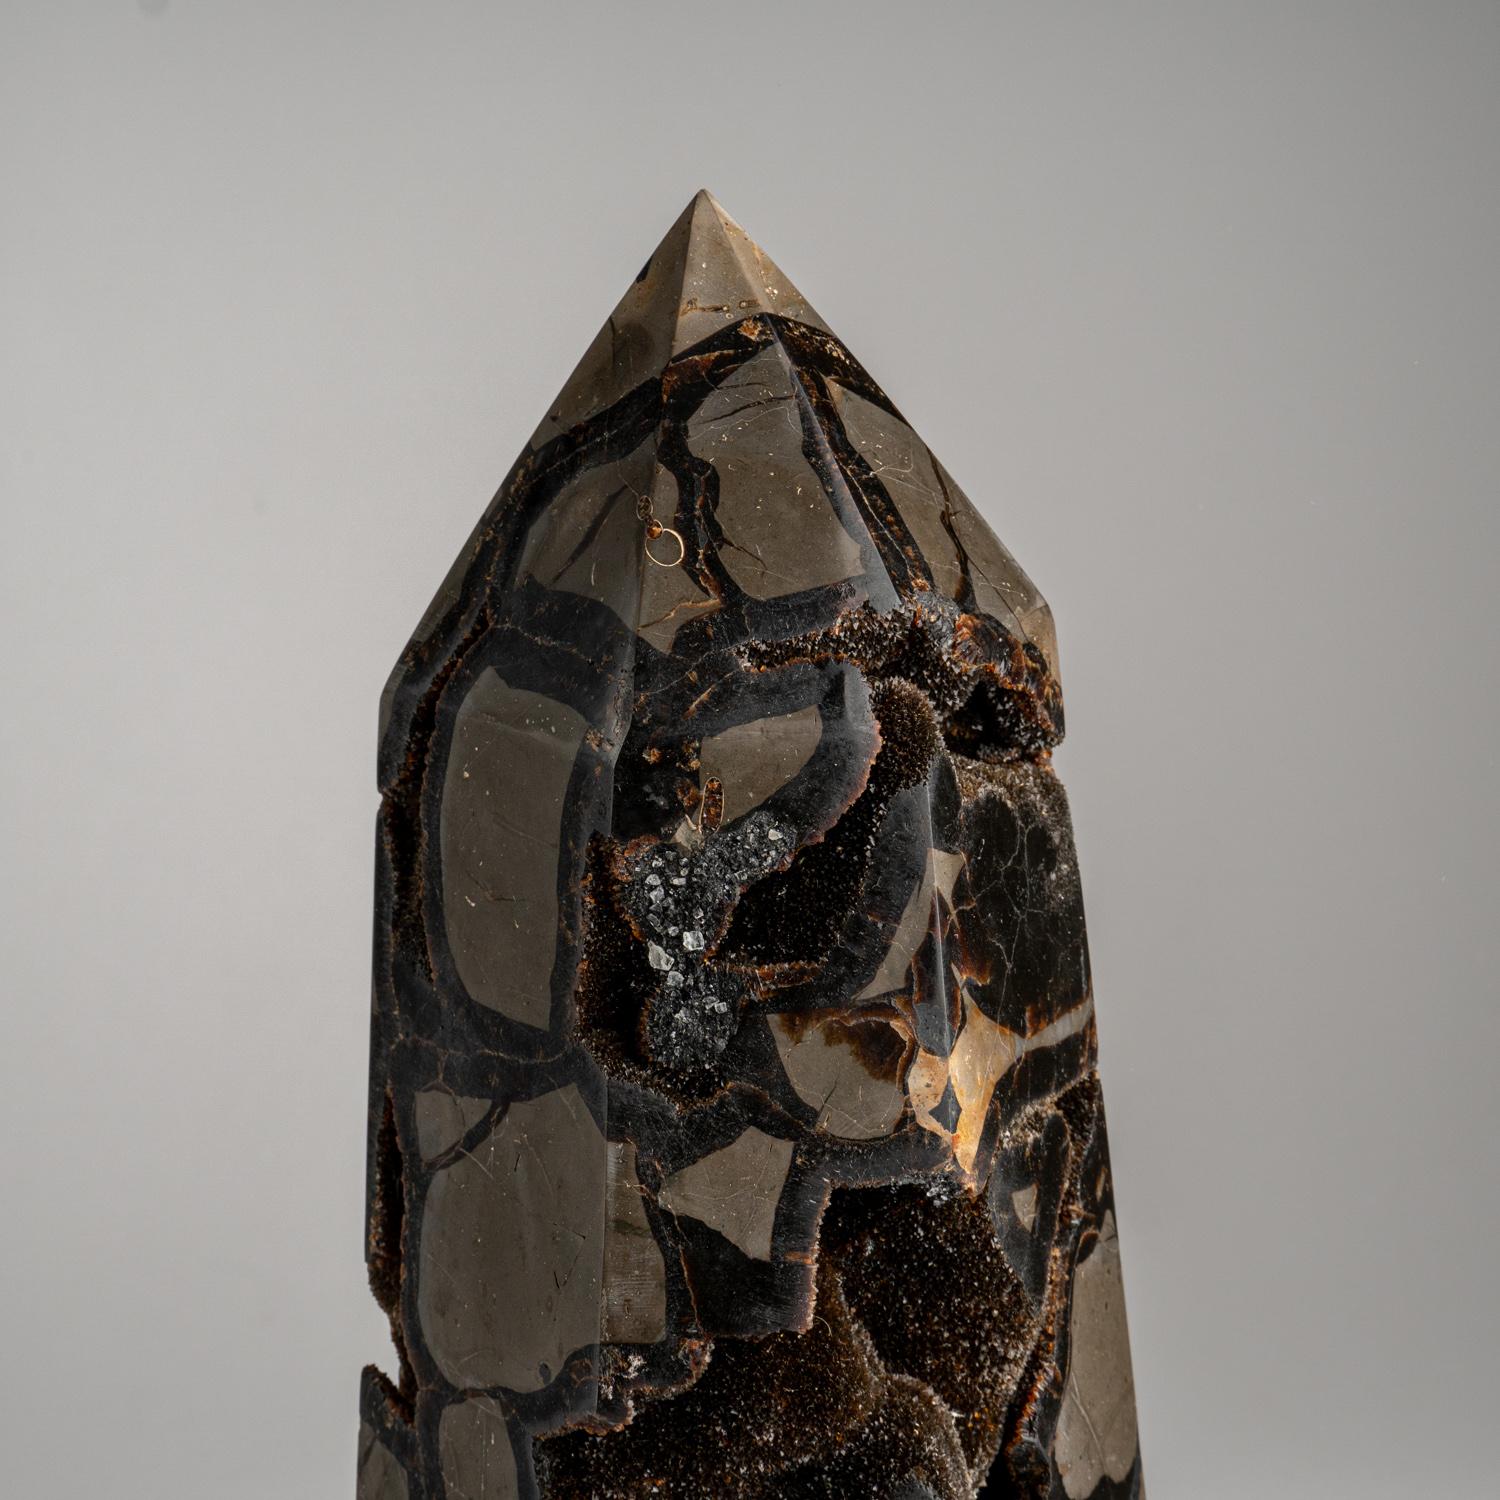 This AAA quality Septarian druzy point features an exposed area lined with shimmering quartz crystals, and boasts a hand-polished, highly reflective back. Boasting a stabilizing energy, Septarian is known to promote clear communication, deepen